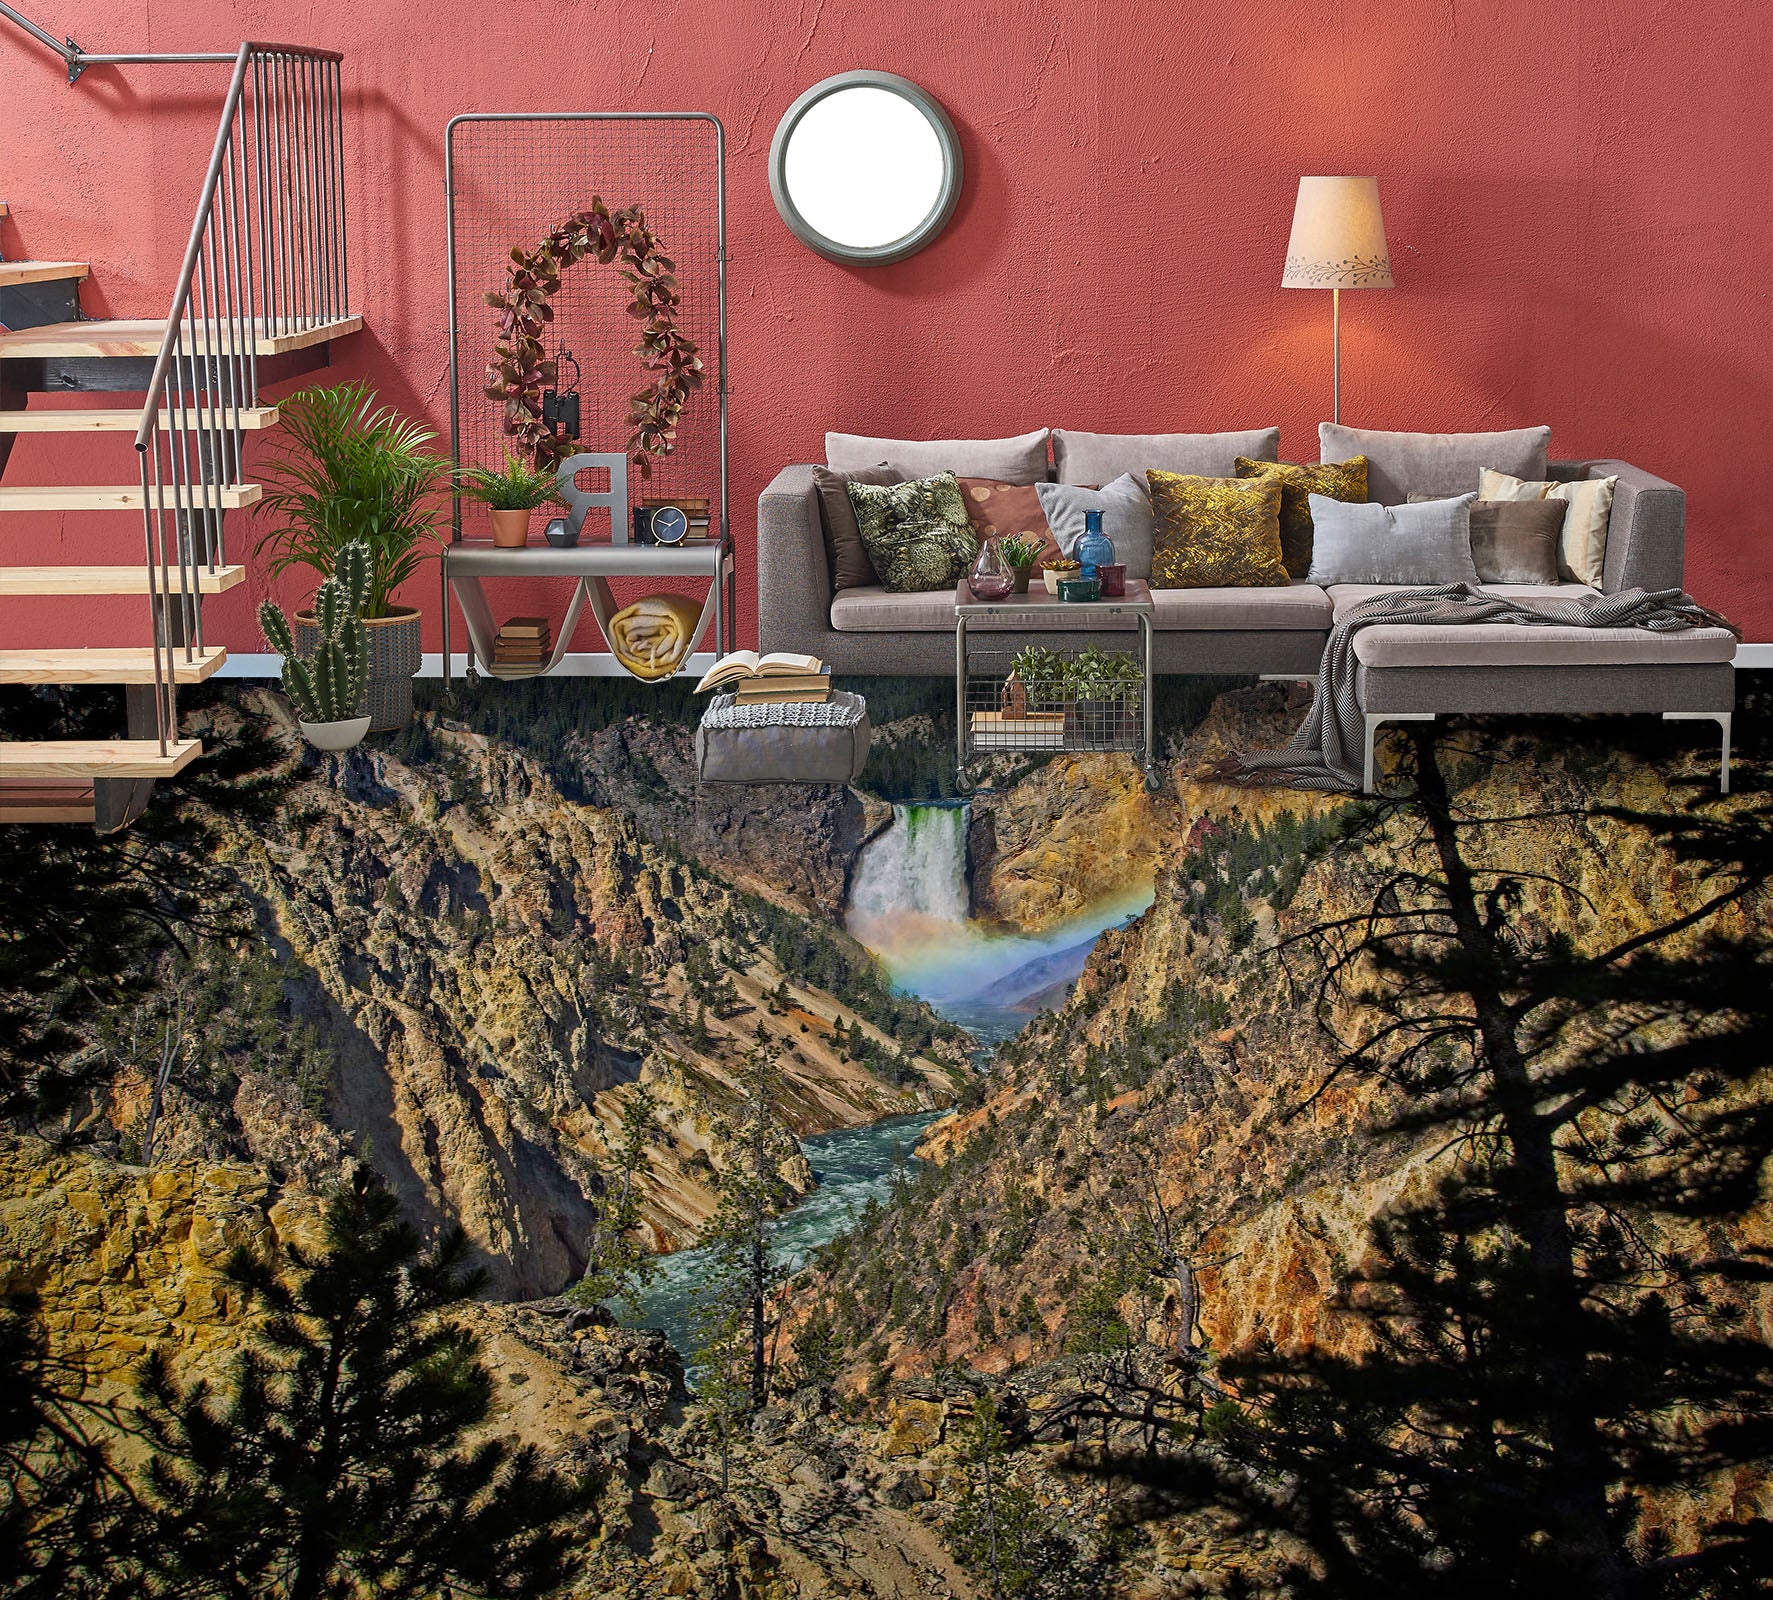 3D Mountain Scenery 567 Kathy Barefield Floor Mural  Wallpaper Murals Self-Adhesive Removable Print Epoxy